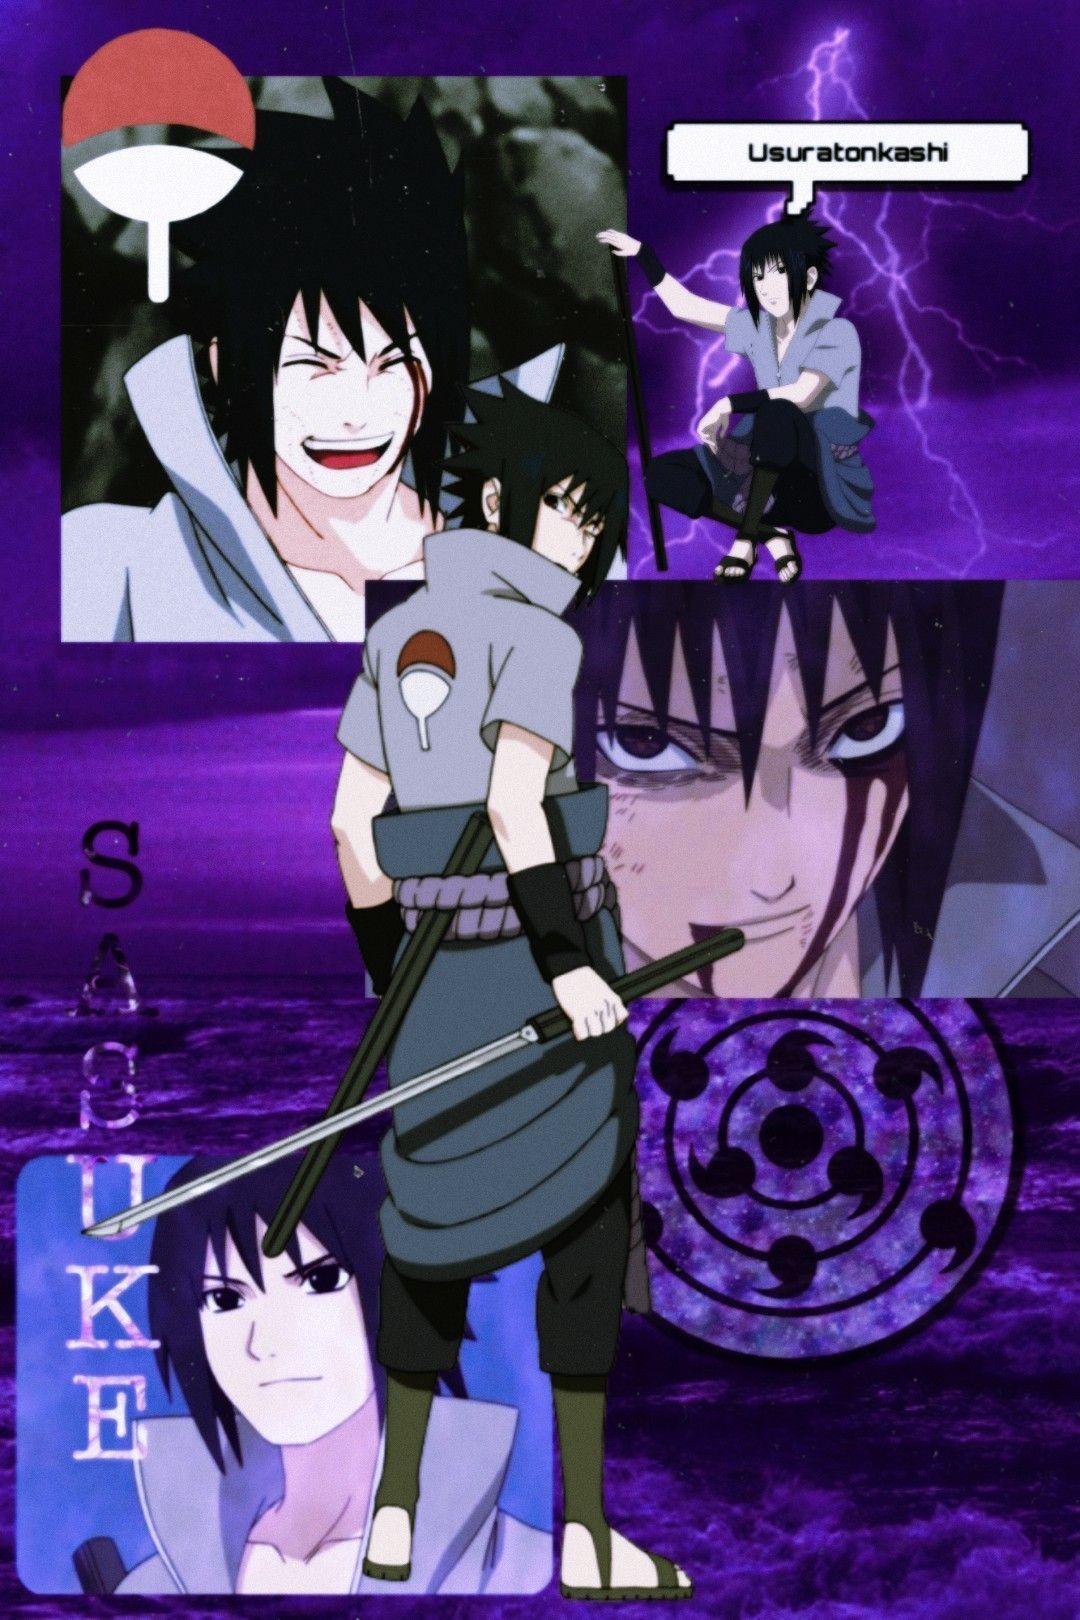 A picture of anime characters with different backgrounds - Sasuke Uchiha